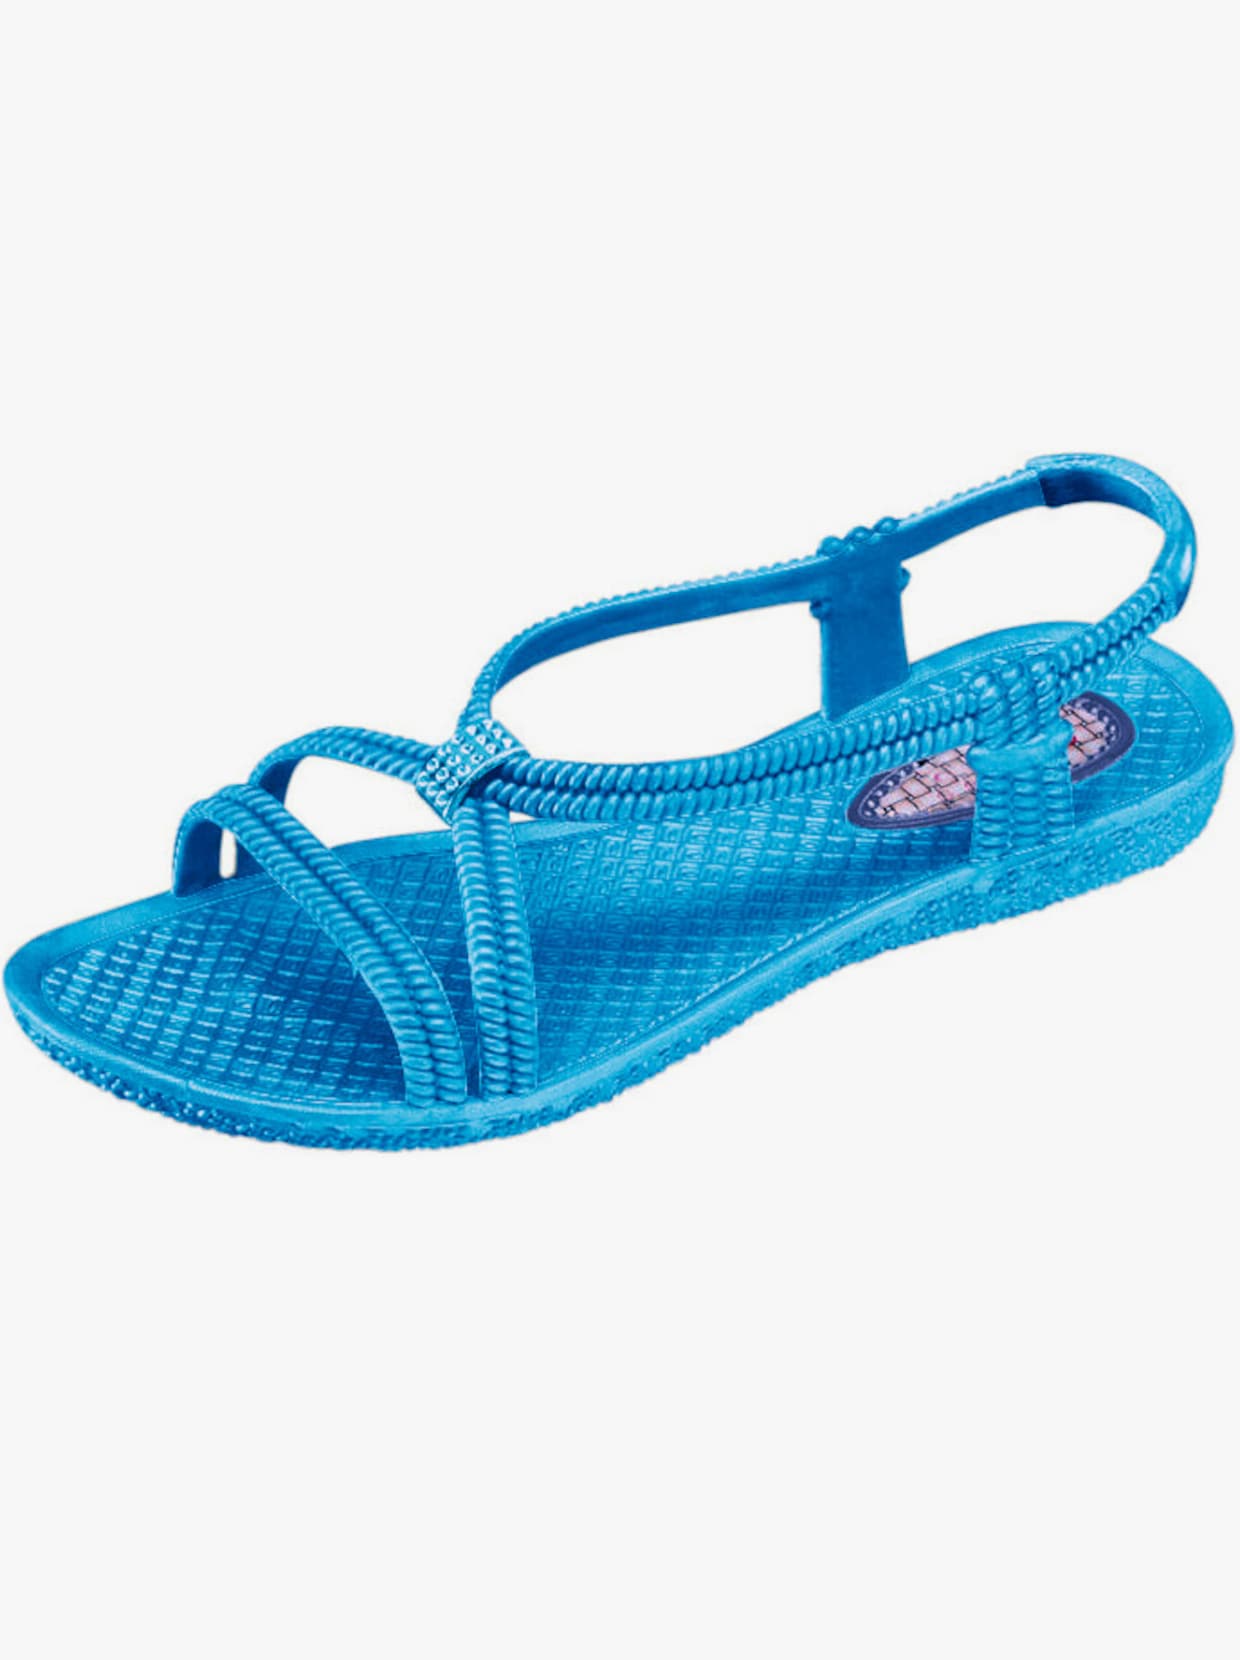 Badslippers - turquoise